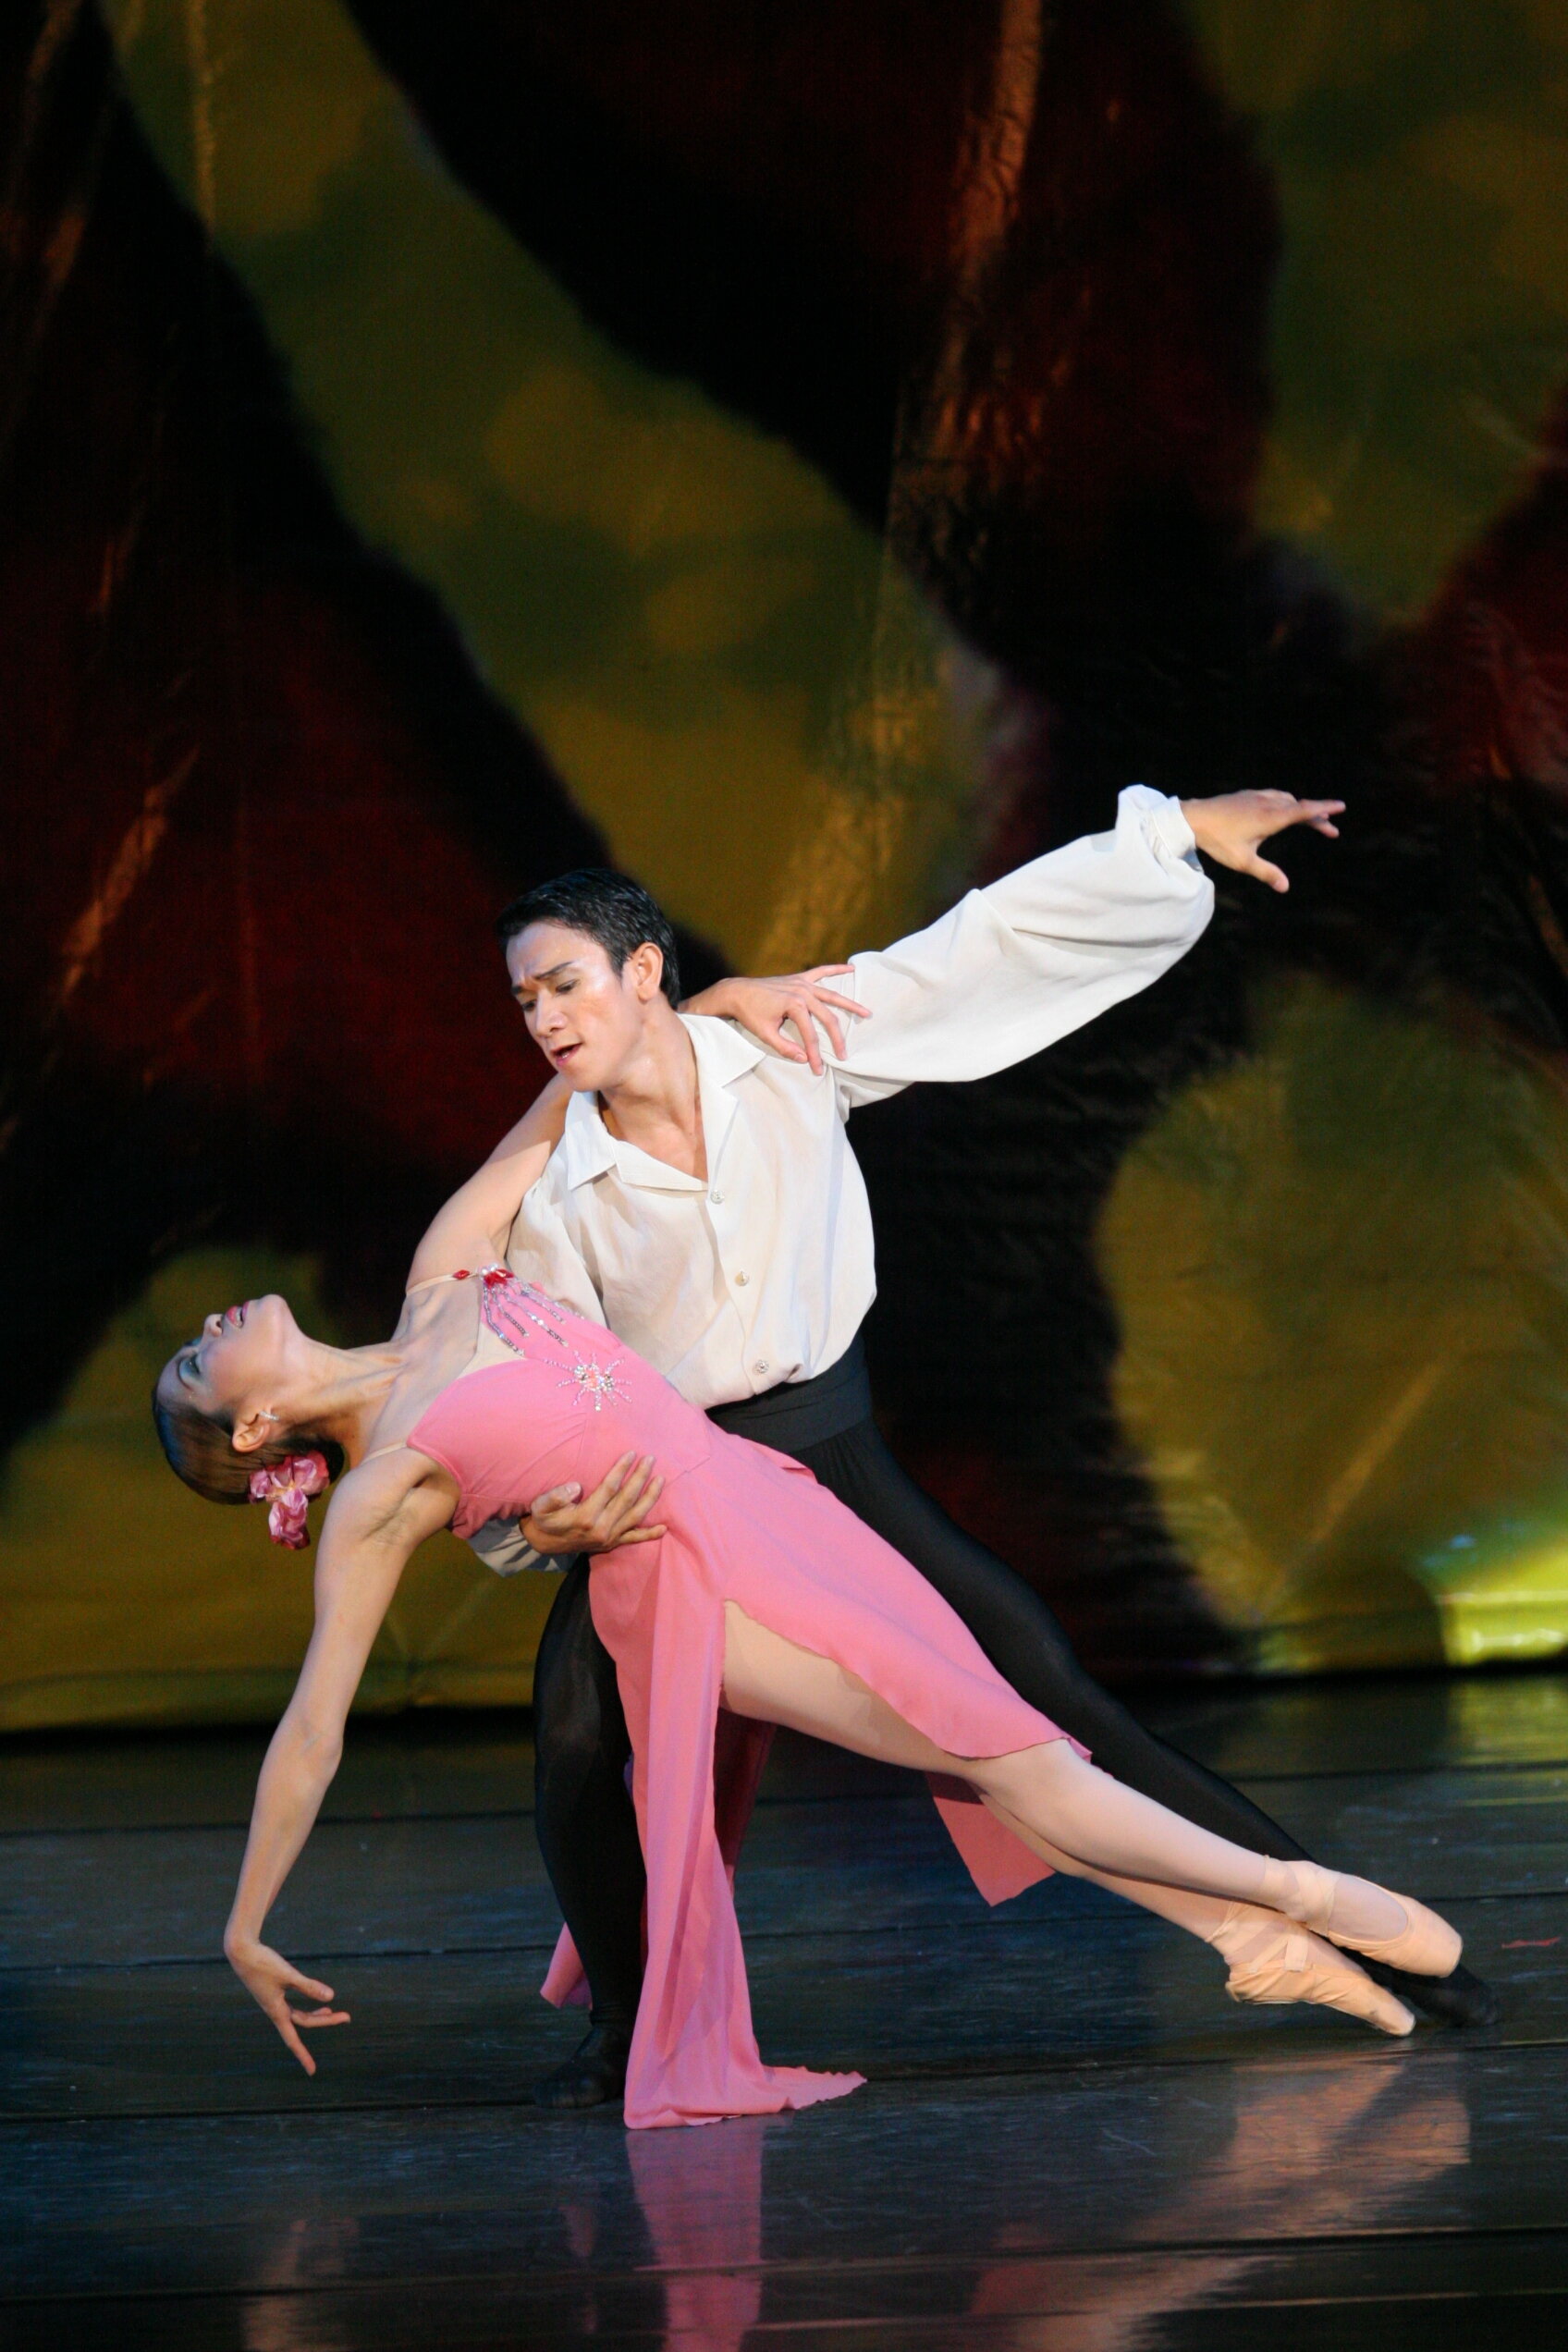    Sandralynn Huang in pink and Jerome Espejo in black and white figure in a passionate pas de deux for  BM Goes International  (2015), a preview of numbers to be performed by Ballet Manila in shows and competitions abroad that year. Photo by Ocs Alv